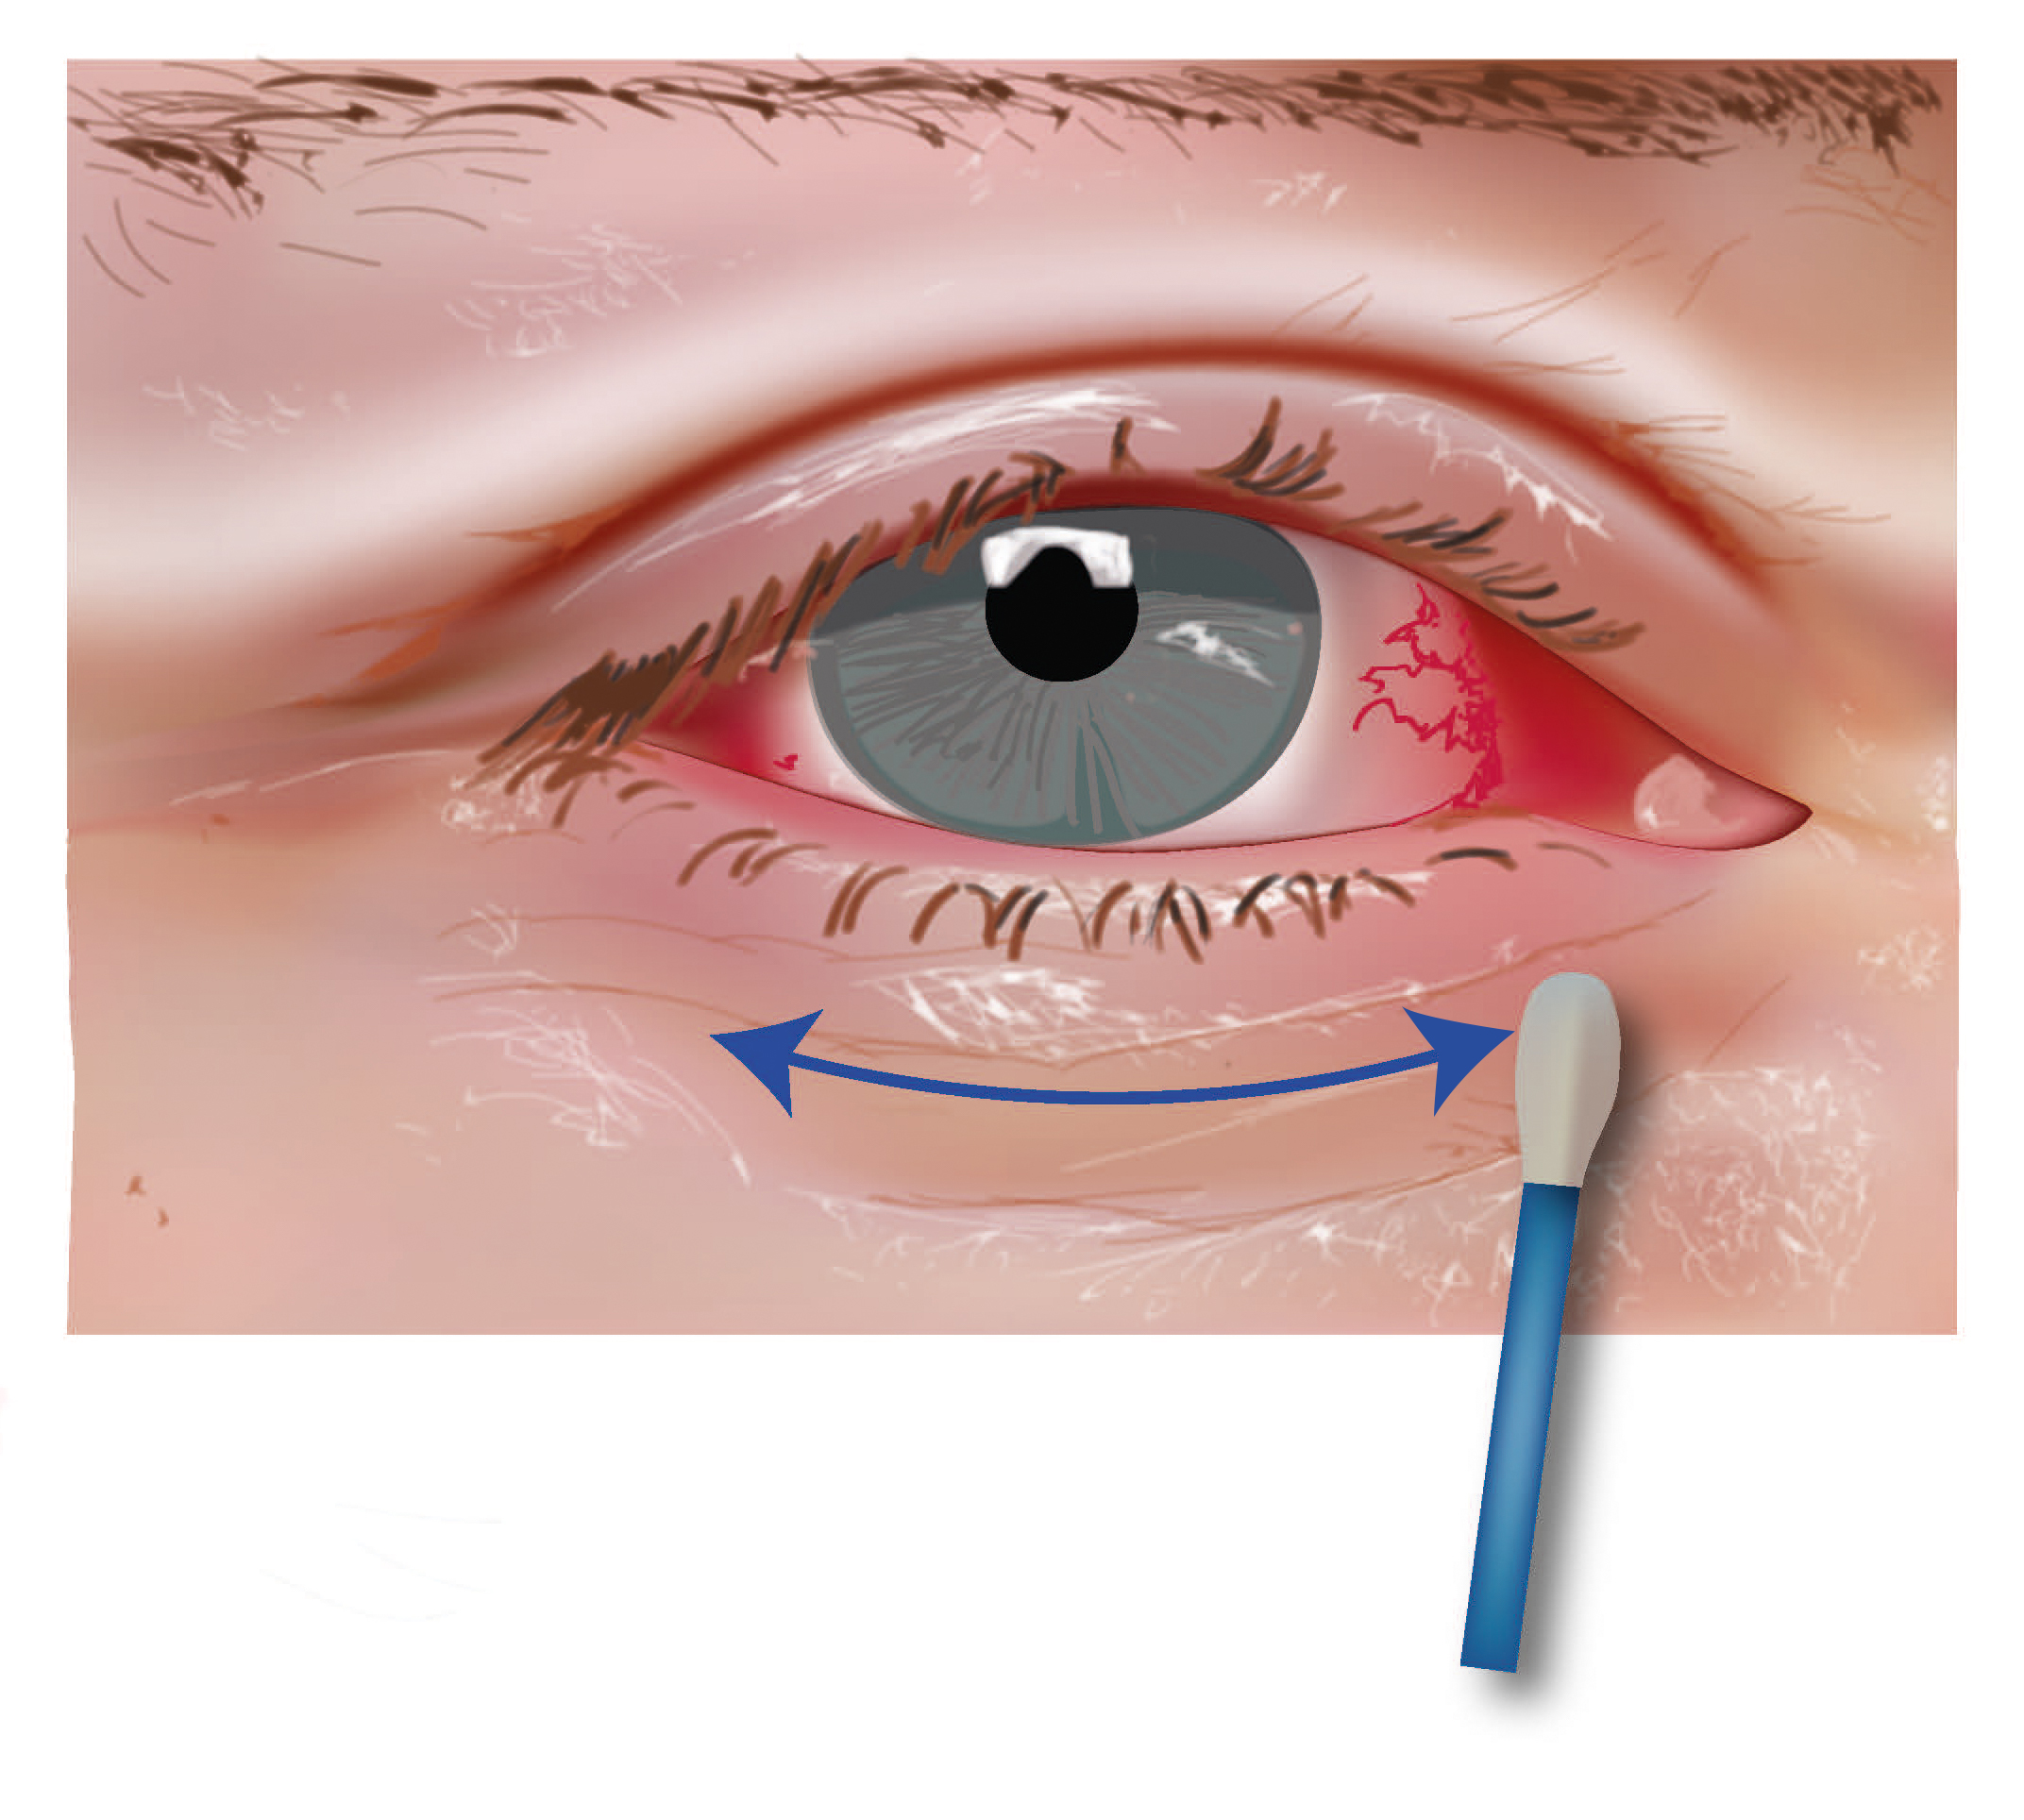 Cleaning the eye using a cotton bud